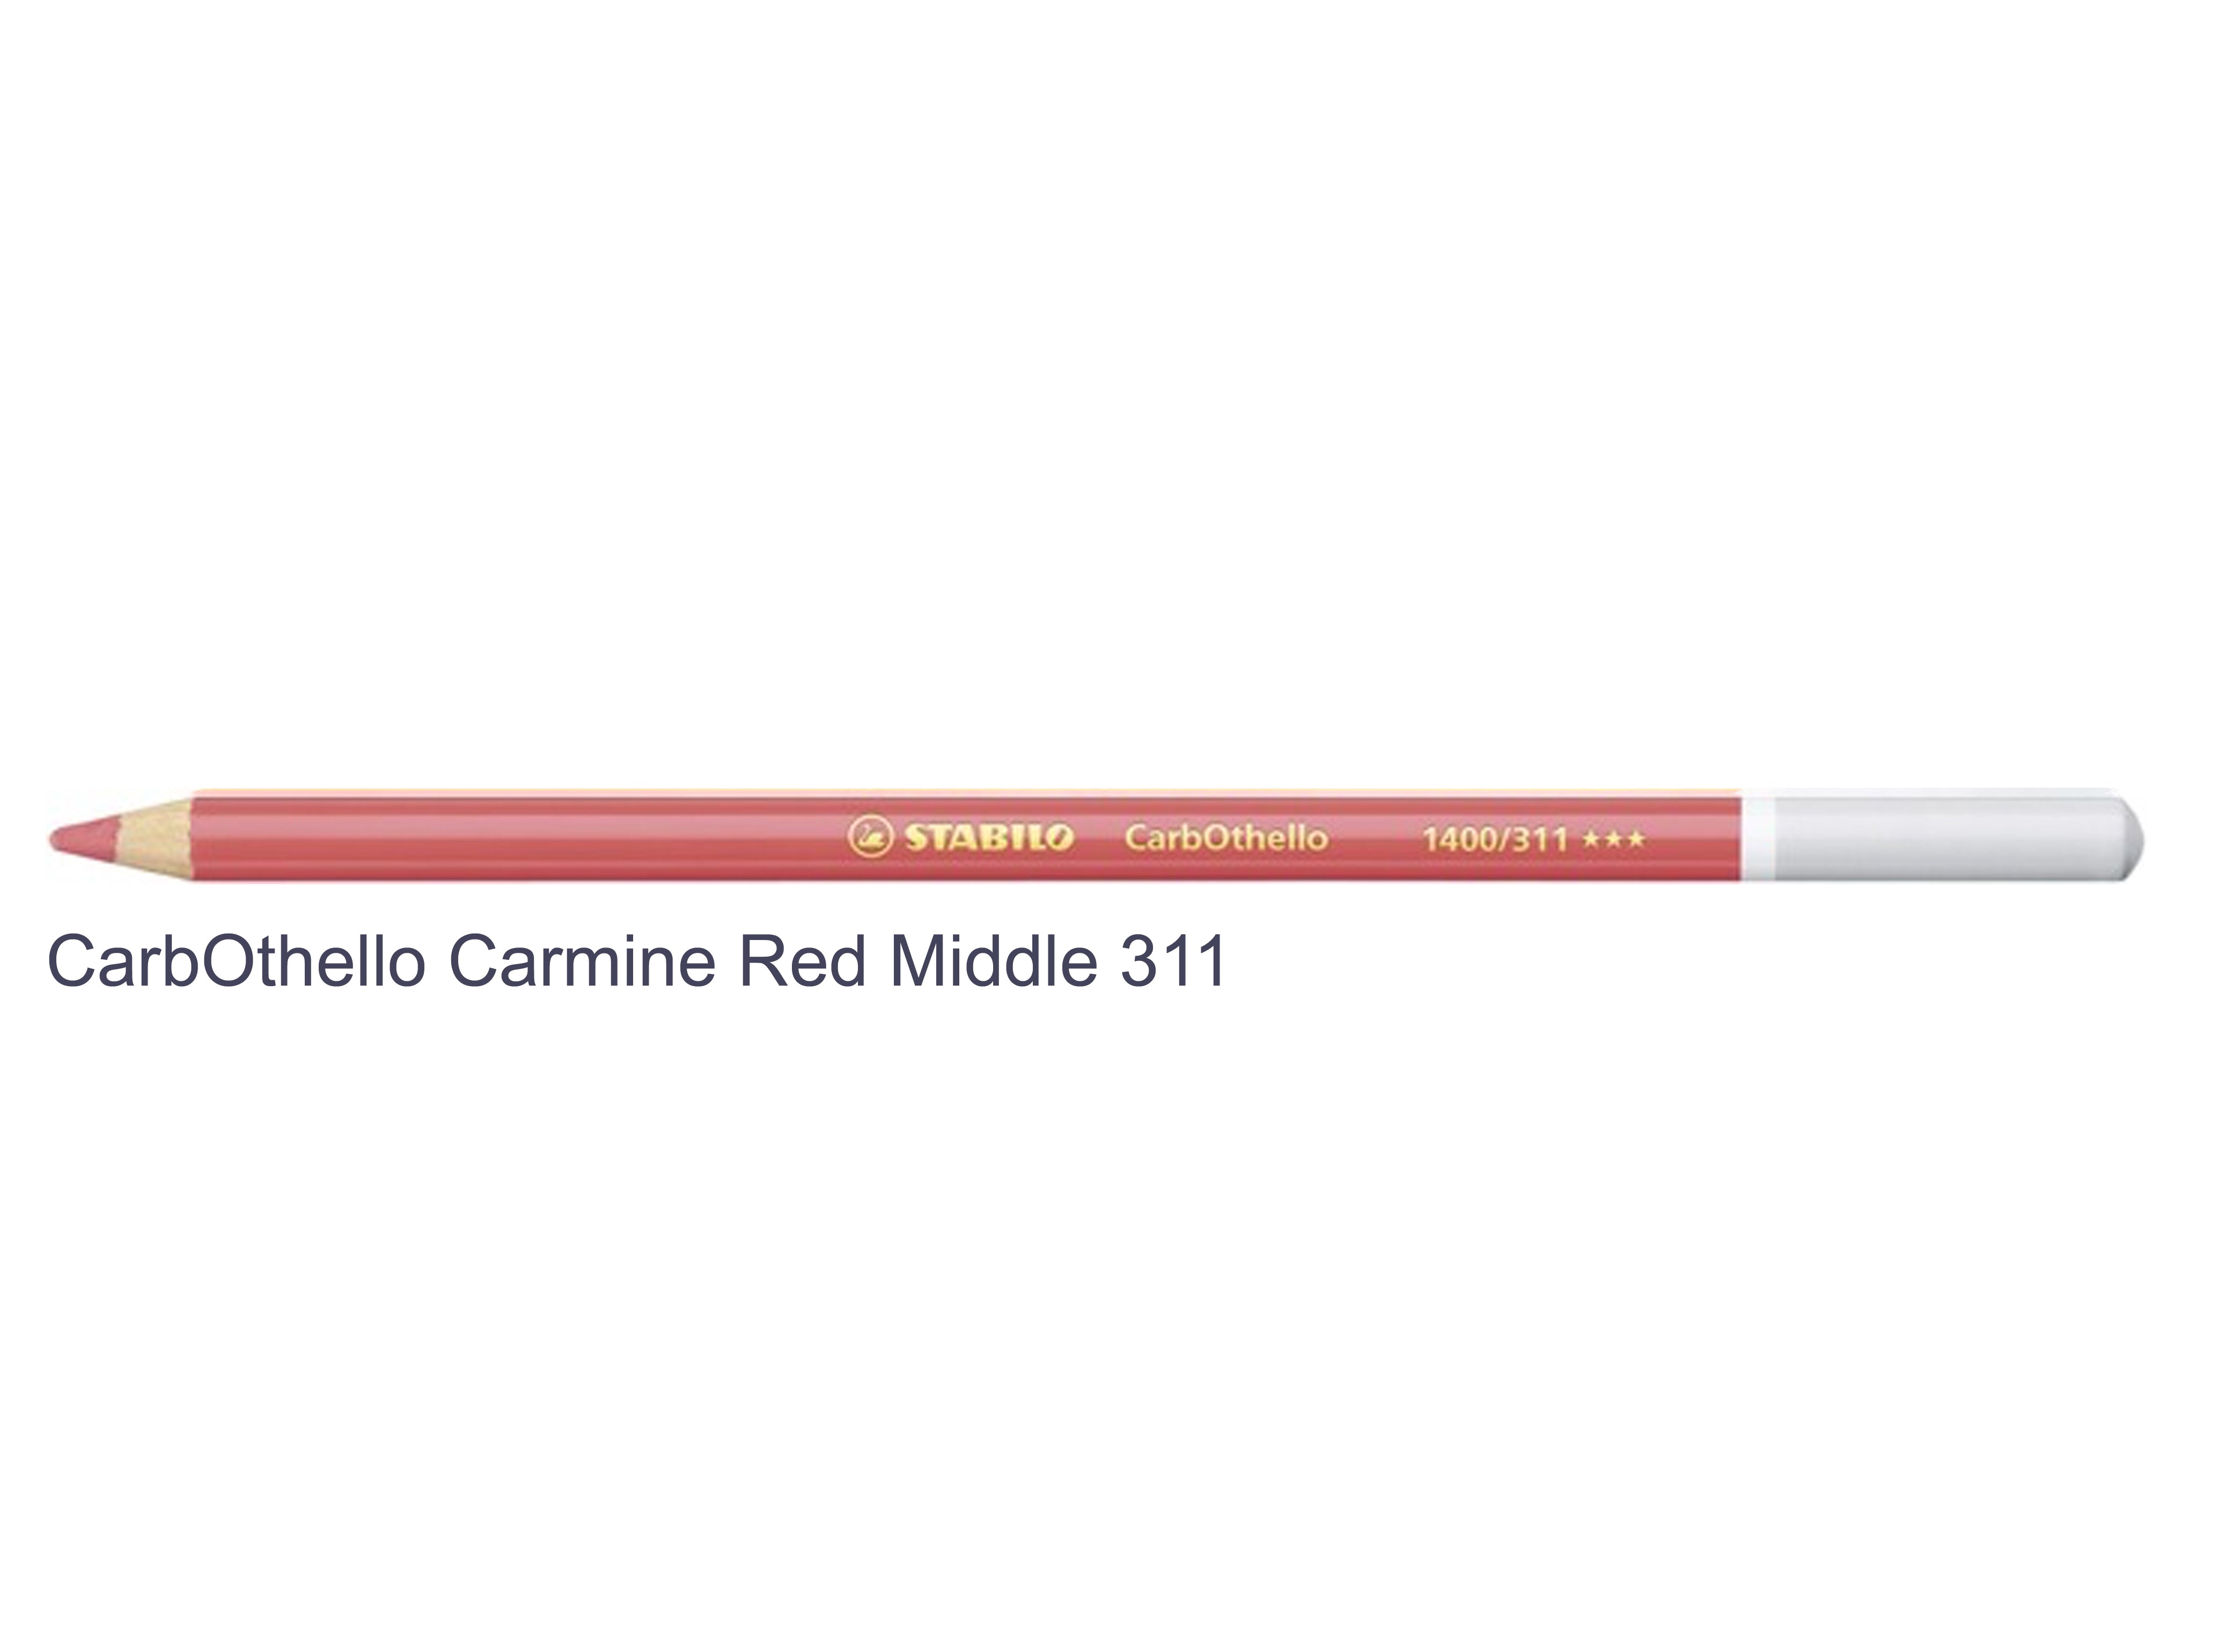 Carmine Red Middle 311 STABILO CarbOthello chalk-pastel pencils